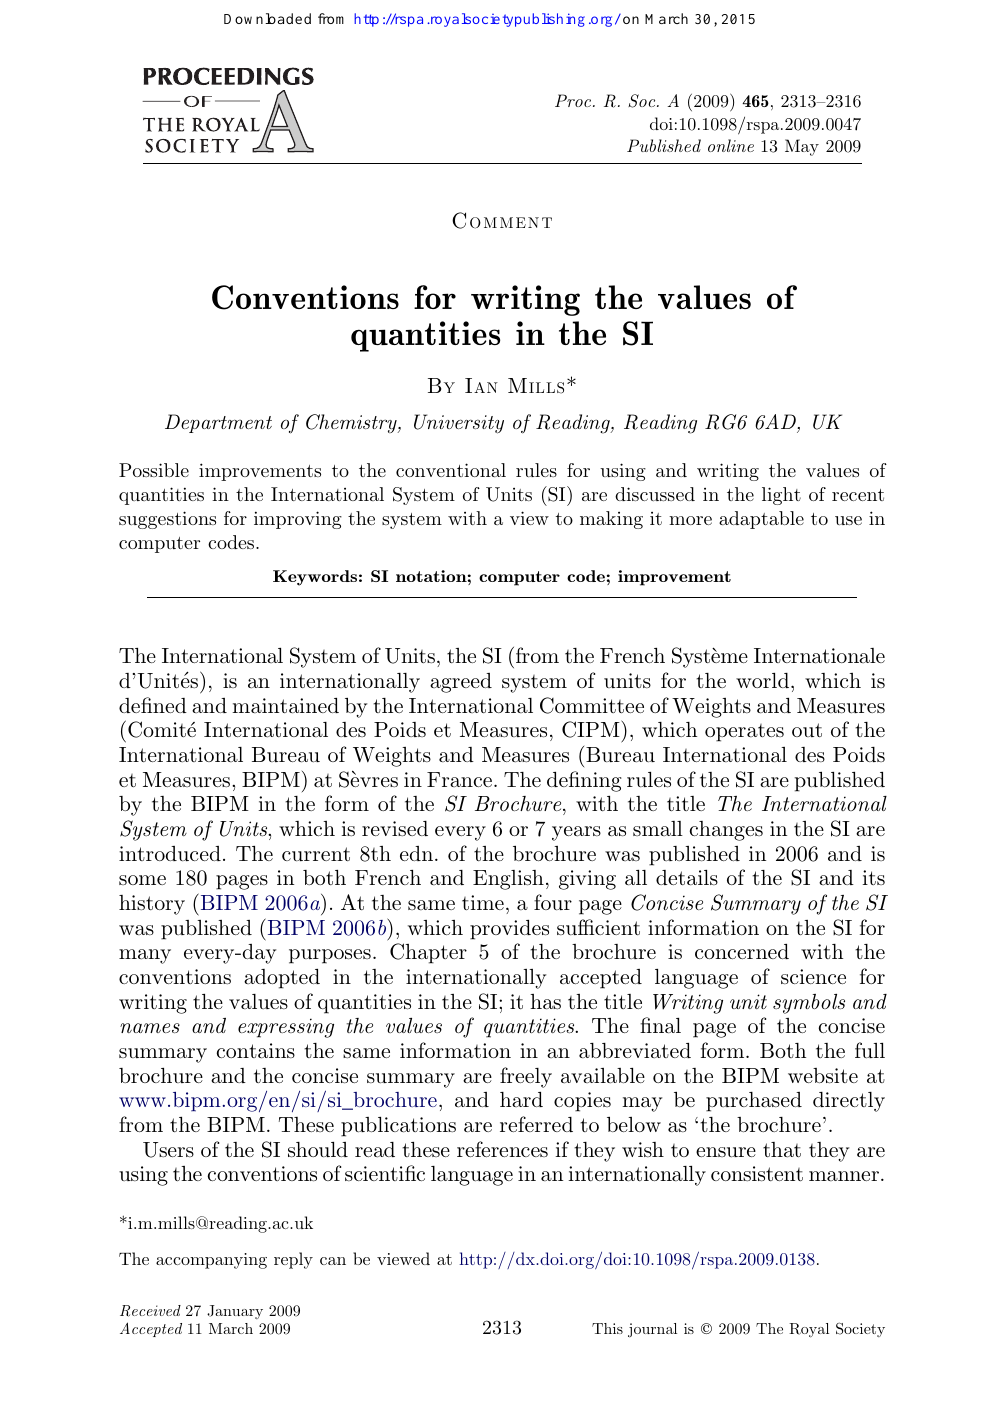 Conventions For Writing The Values Of Quantities In The Si Topic Of Research Paper In History And Archaeology Download Scholarly Article Pdf And Read For Free On Cyberleninka Open Science Hub